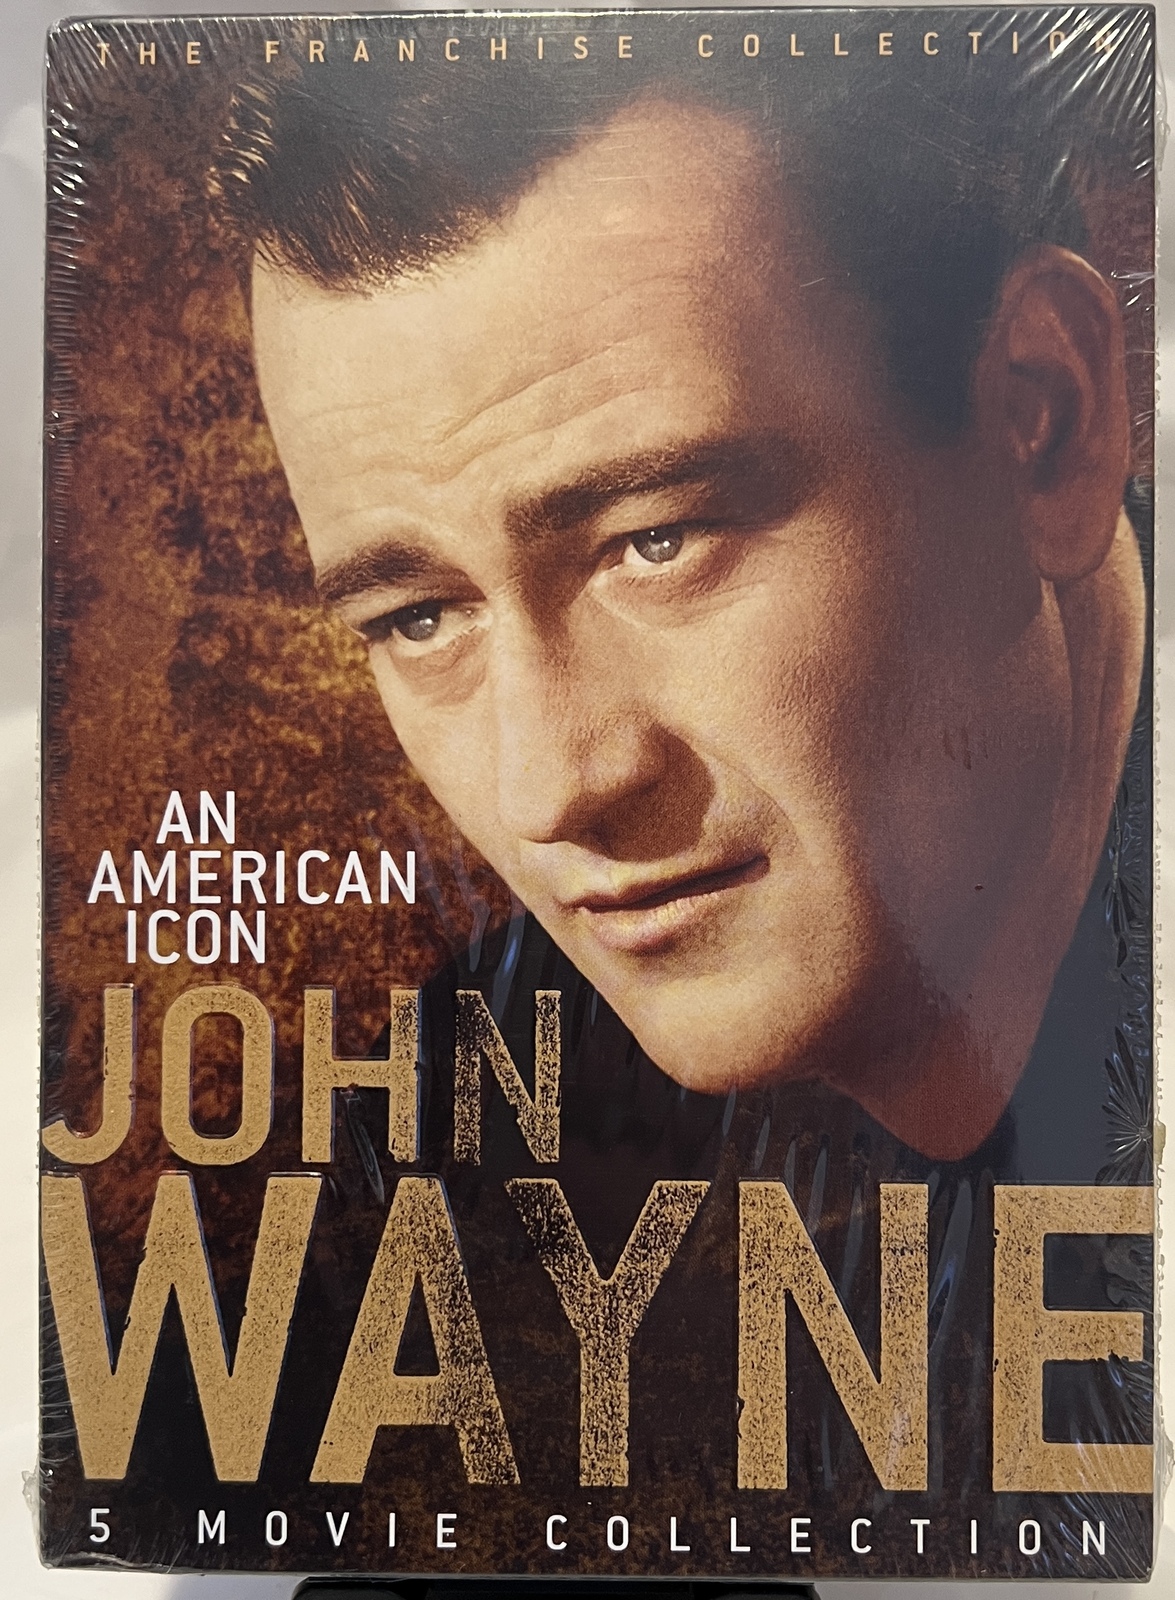 Primary image for John Wayne - An American Icon Collection [DVD, 025192655722] 5 Iconic Movies